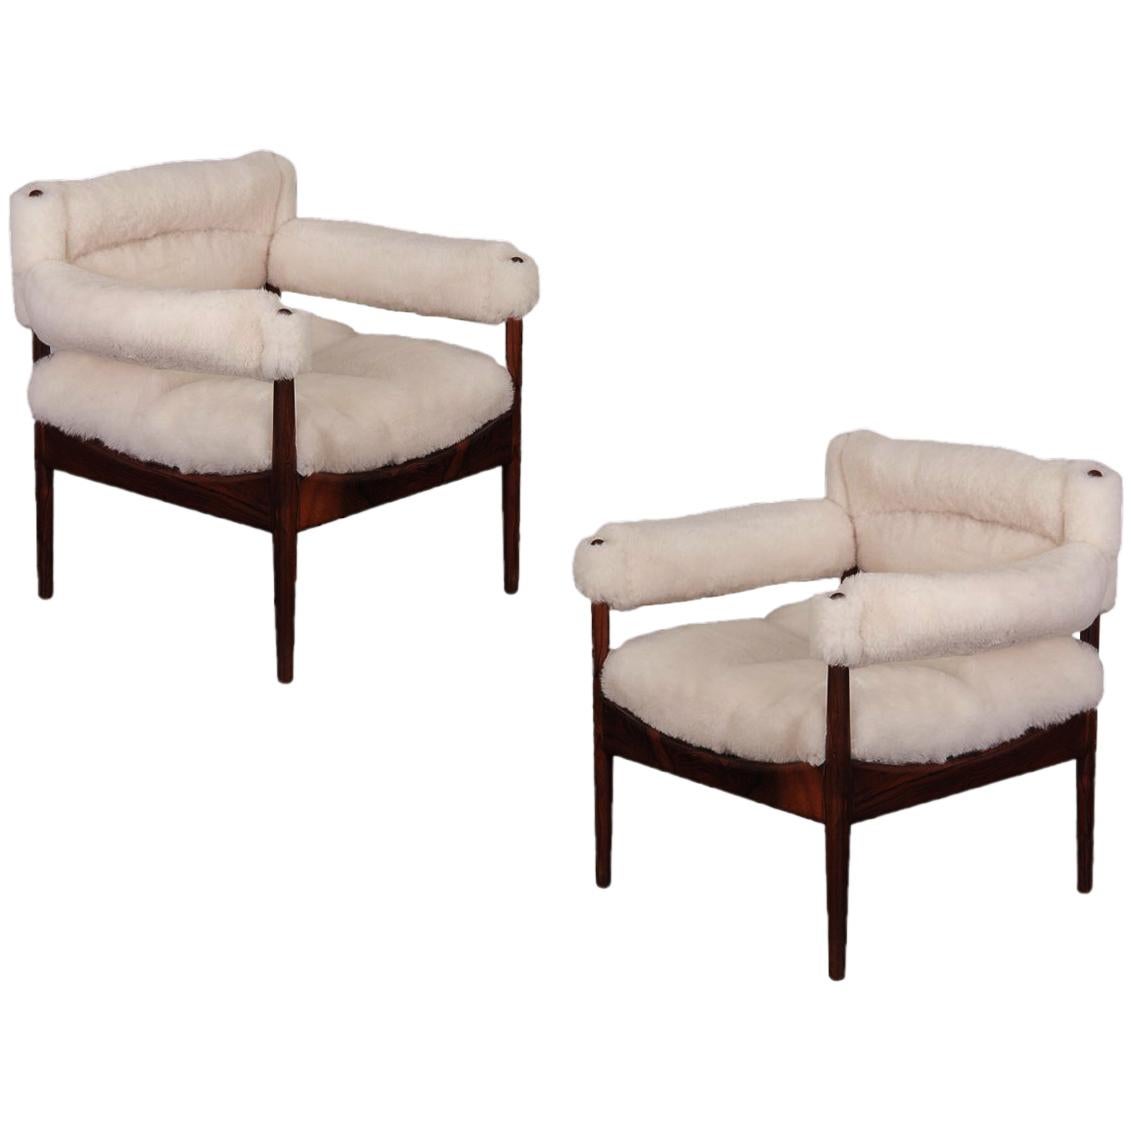 Pair of Kristian Vedel Sheepskin Modus Lounge Chairs